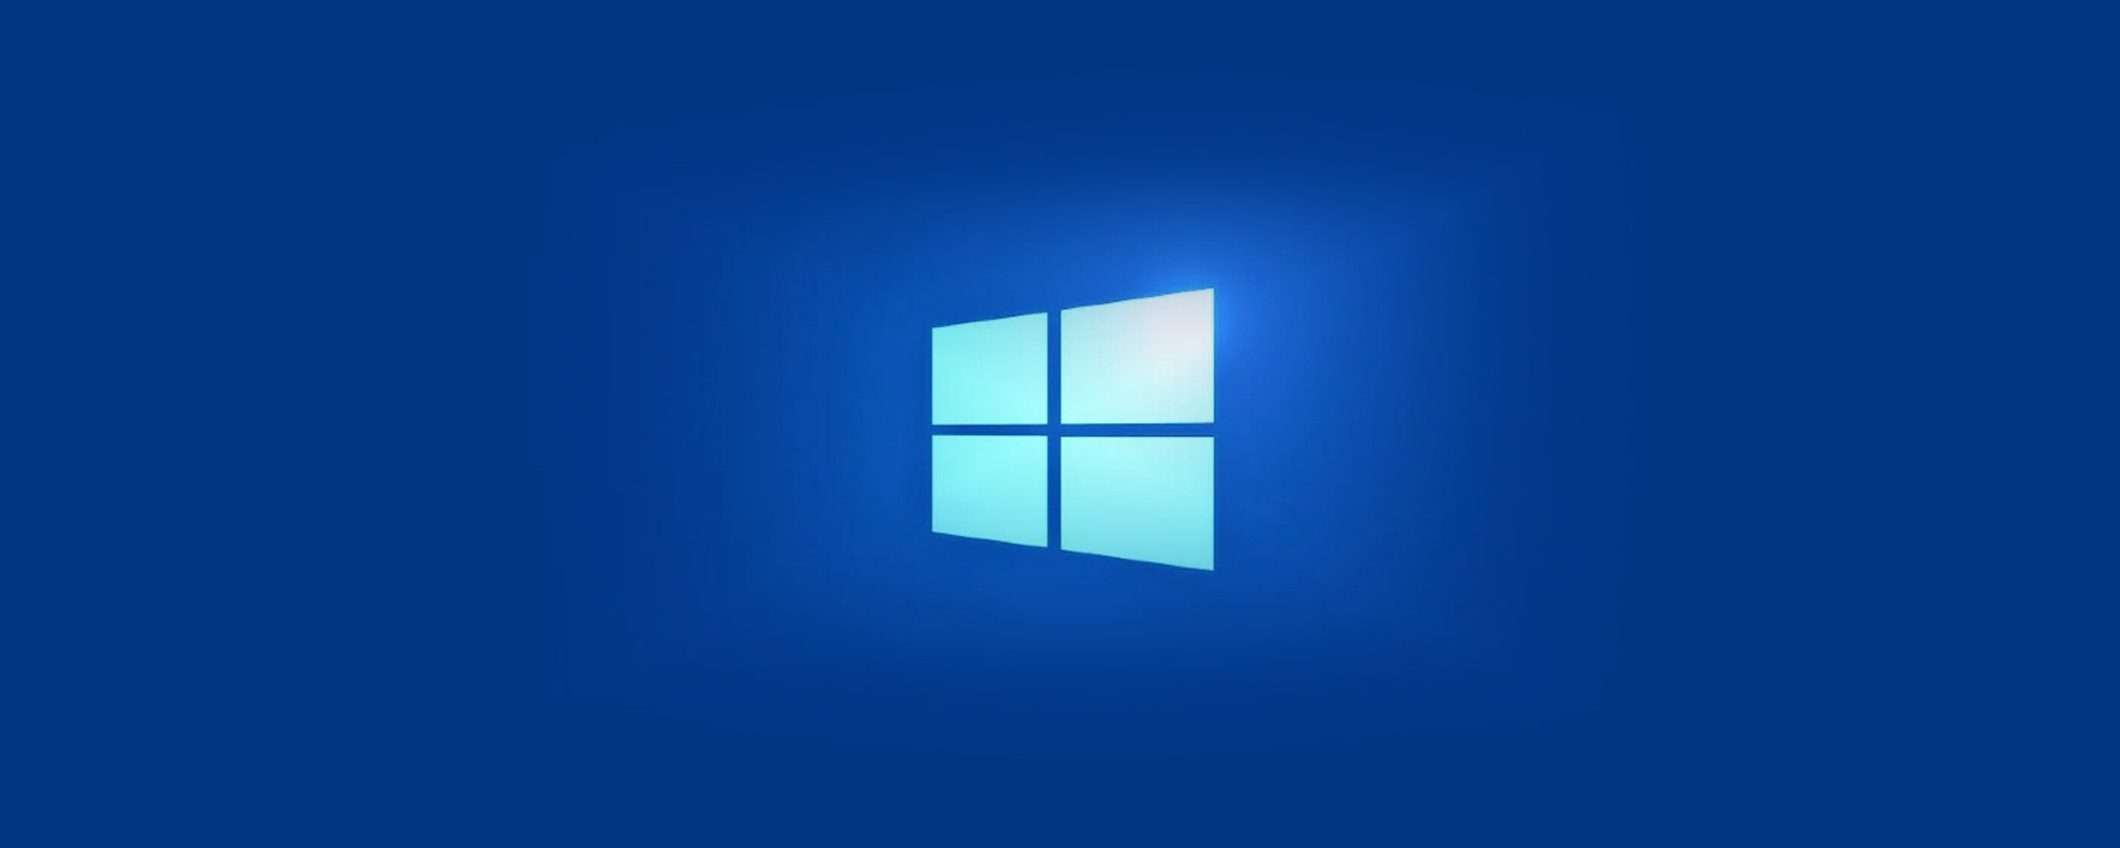 Windows 10 si aggiorna: patch opzionale introduce 3 feature